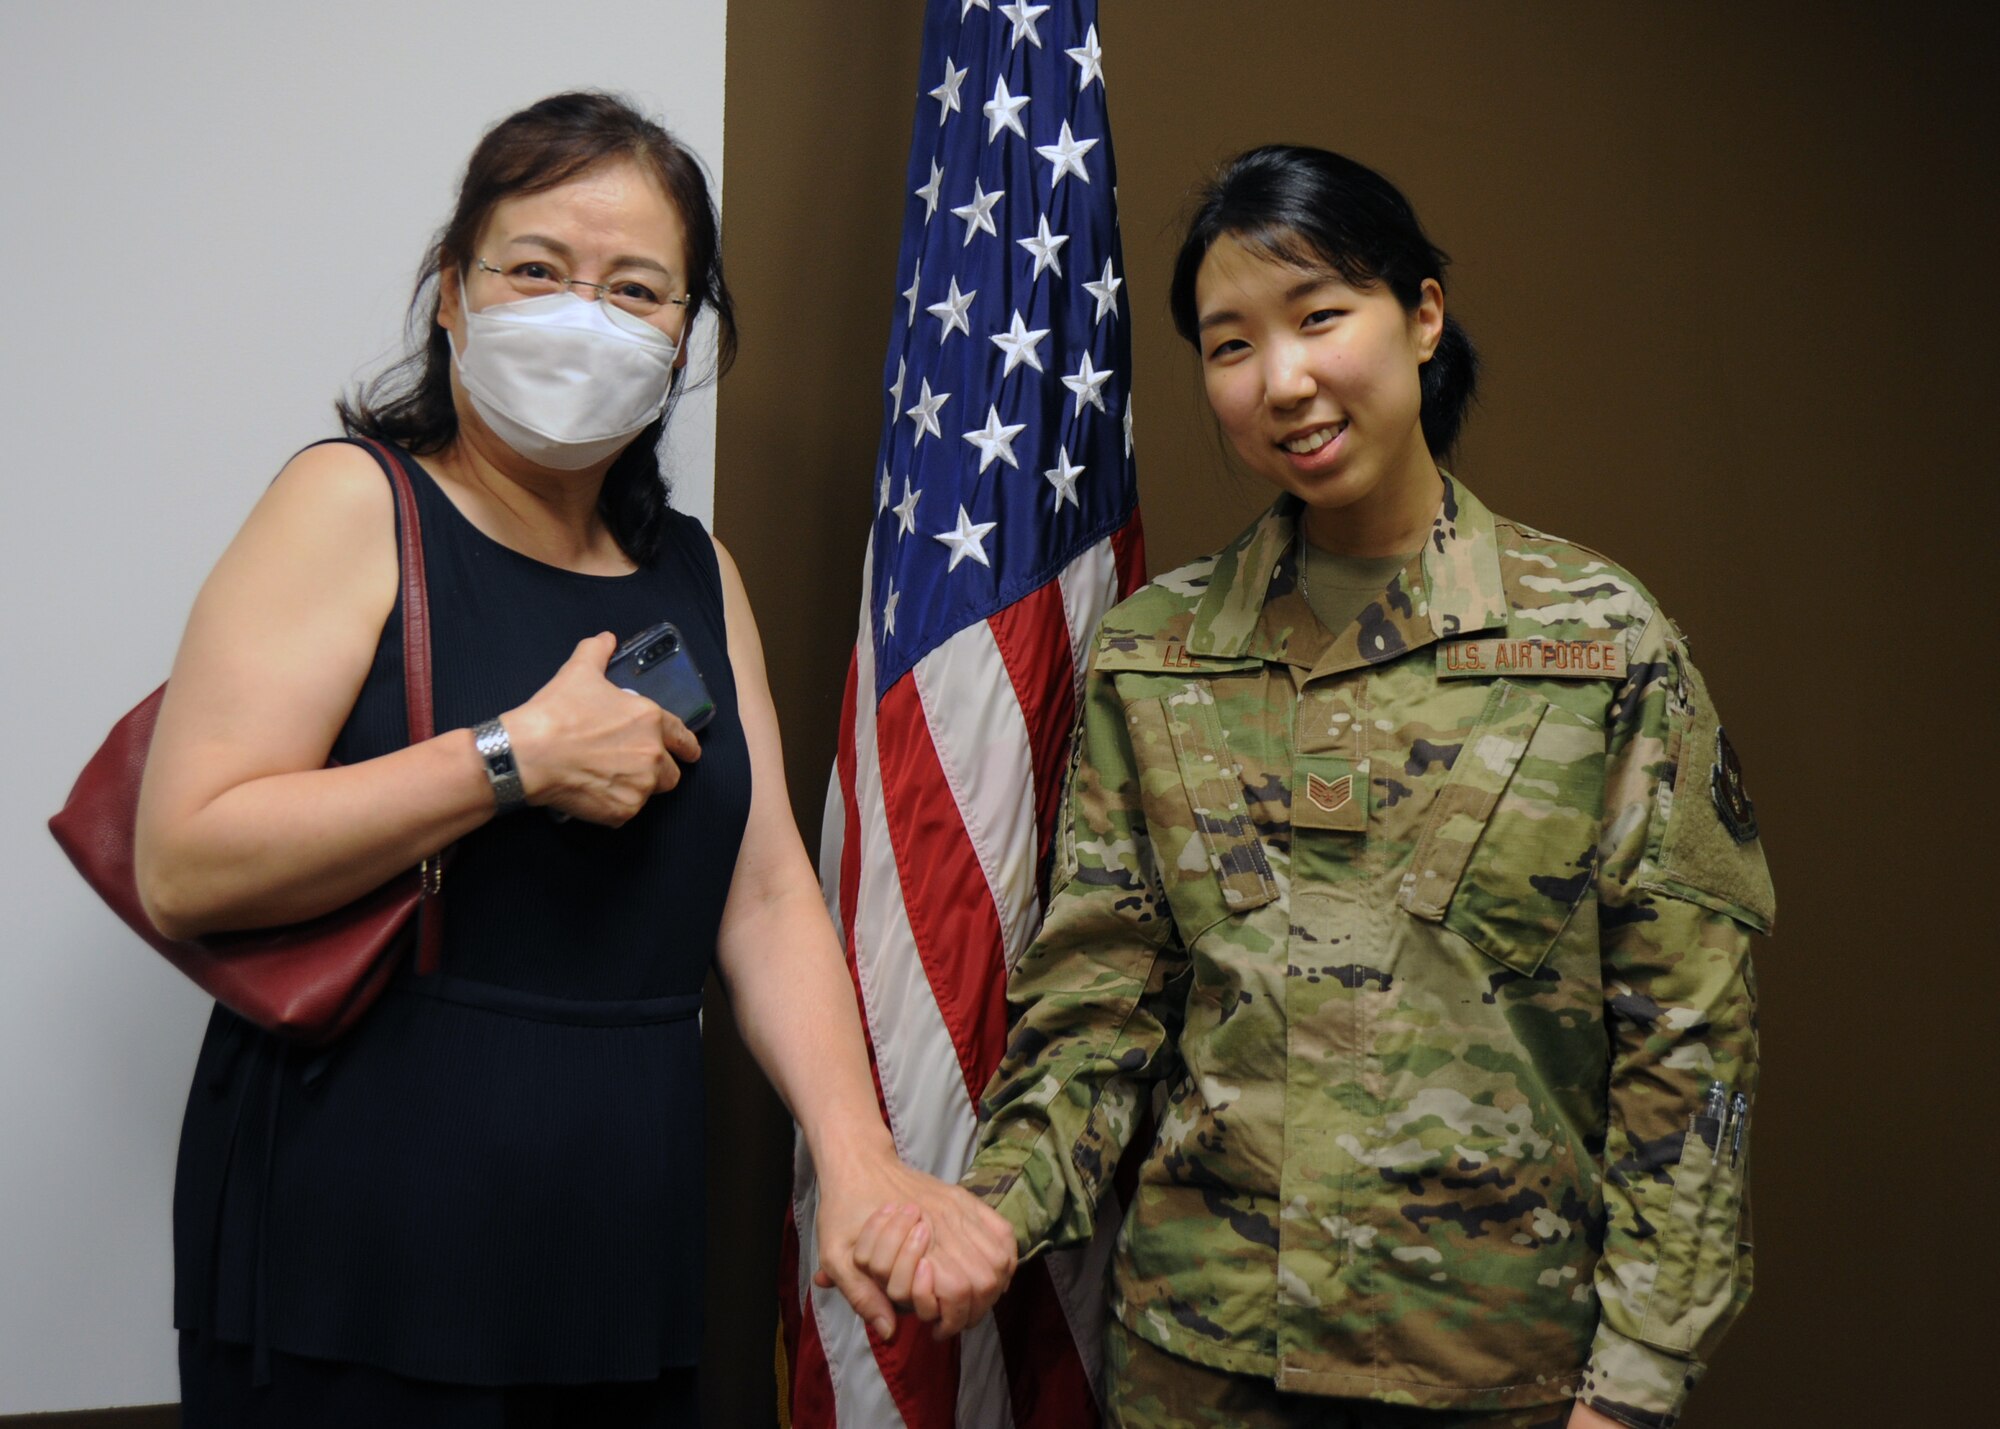 Staff Sgt. Dana Lee, 69th Aerial Port Squadron, air transportation technician, poses for a photo with her mother, Chanel Lee, after being sworn into active duty June 15, 2020, at Joint Base Andrews, Md. Lee is one of eight Airmen selected Air Force-wide for the Enlisted to Medical Degree Preparatory Program. (U.S. Air Force photo by Staff Sgt. Cierra Presentado)